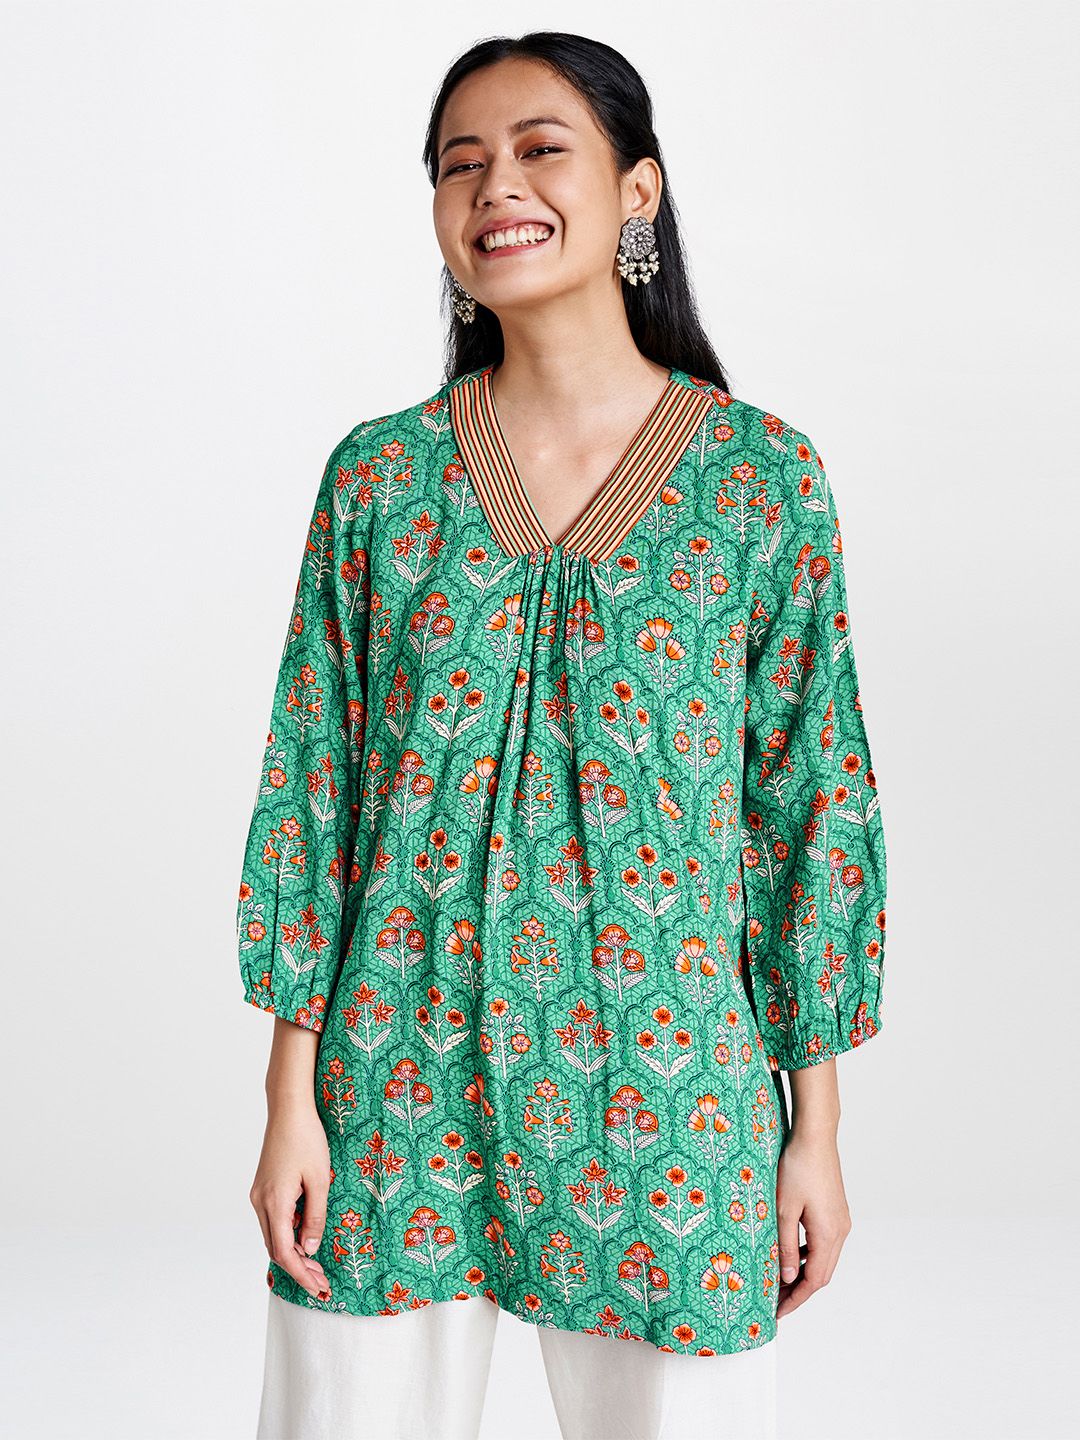 Global Desi Women's Blue & Peach-Coloured Printed Tunic with Gathers Price in India